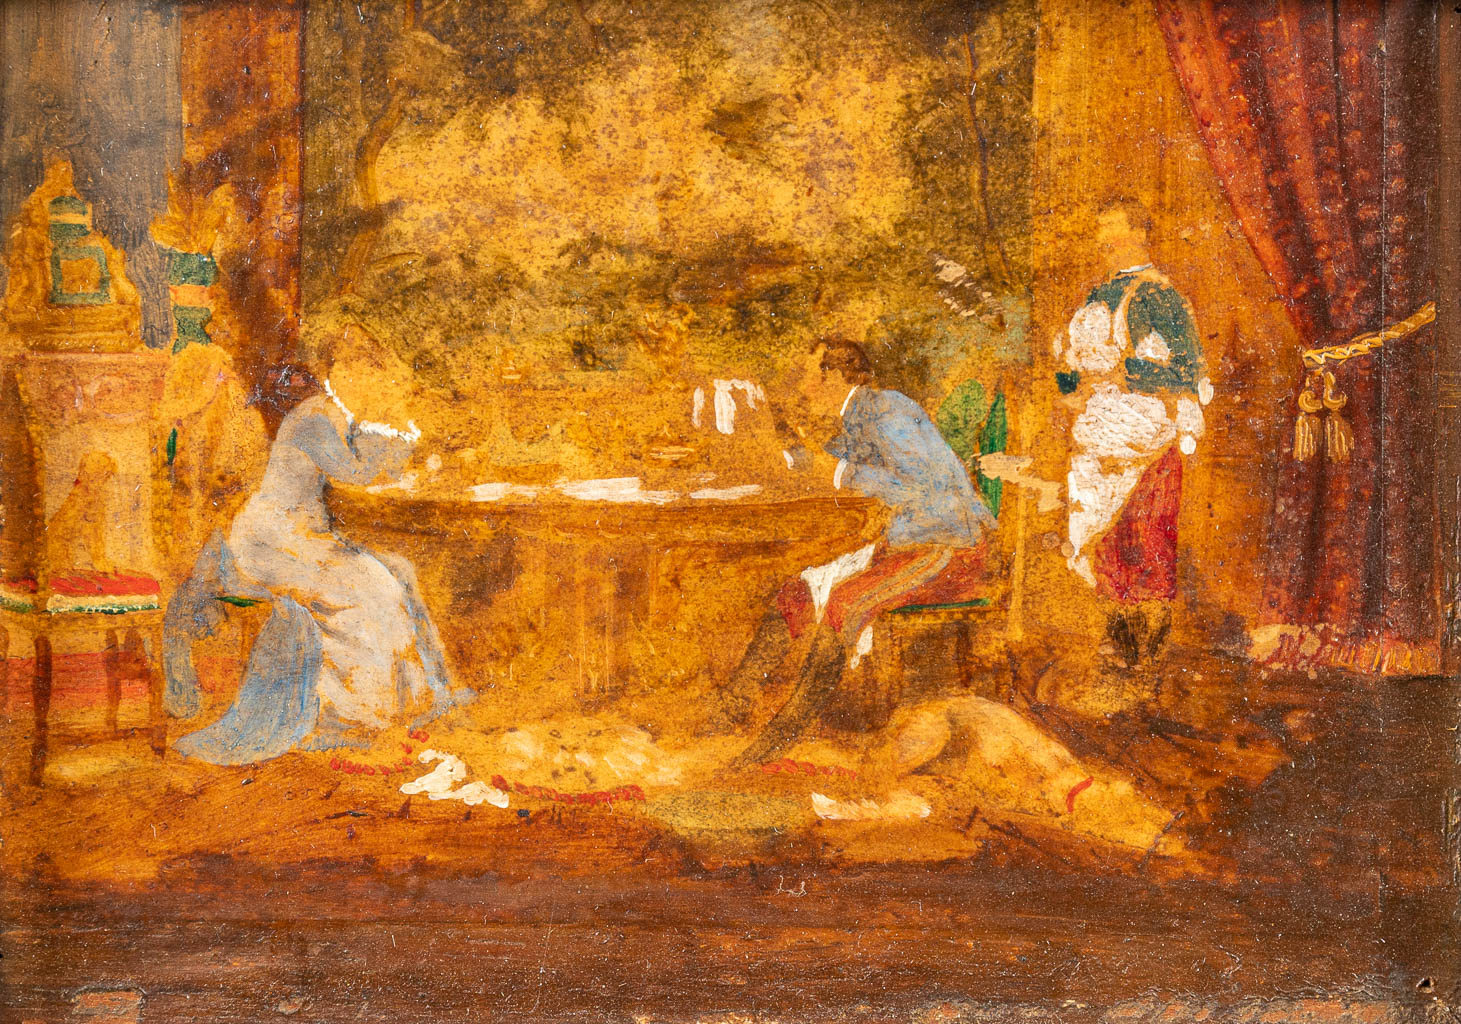 No signature found 'The Dinner' an antique photograph, highlighted with oil paint. 19th century. (13,5 x 9,5 cm)